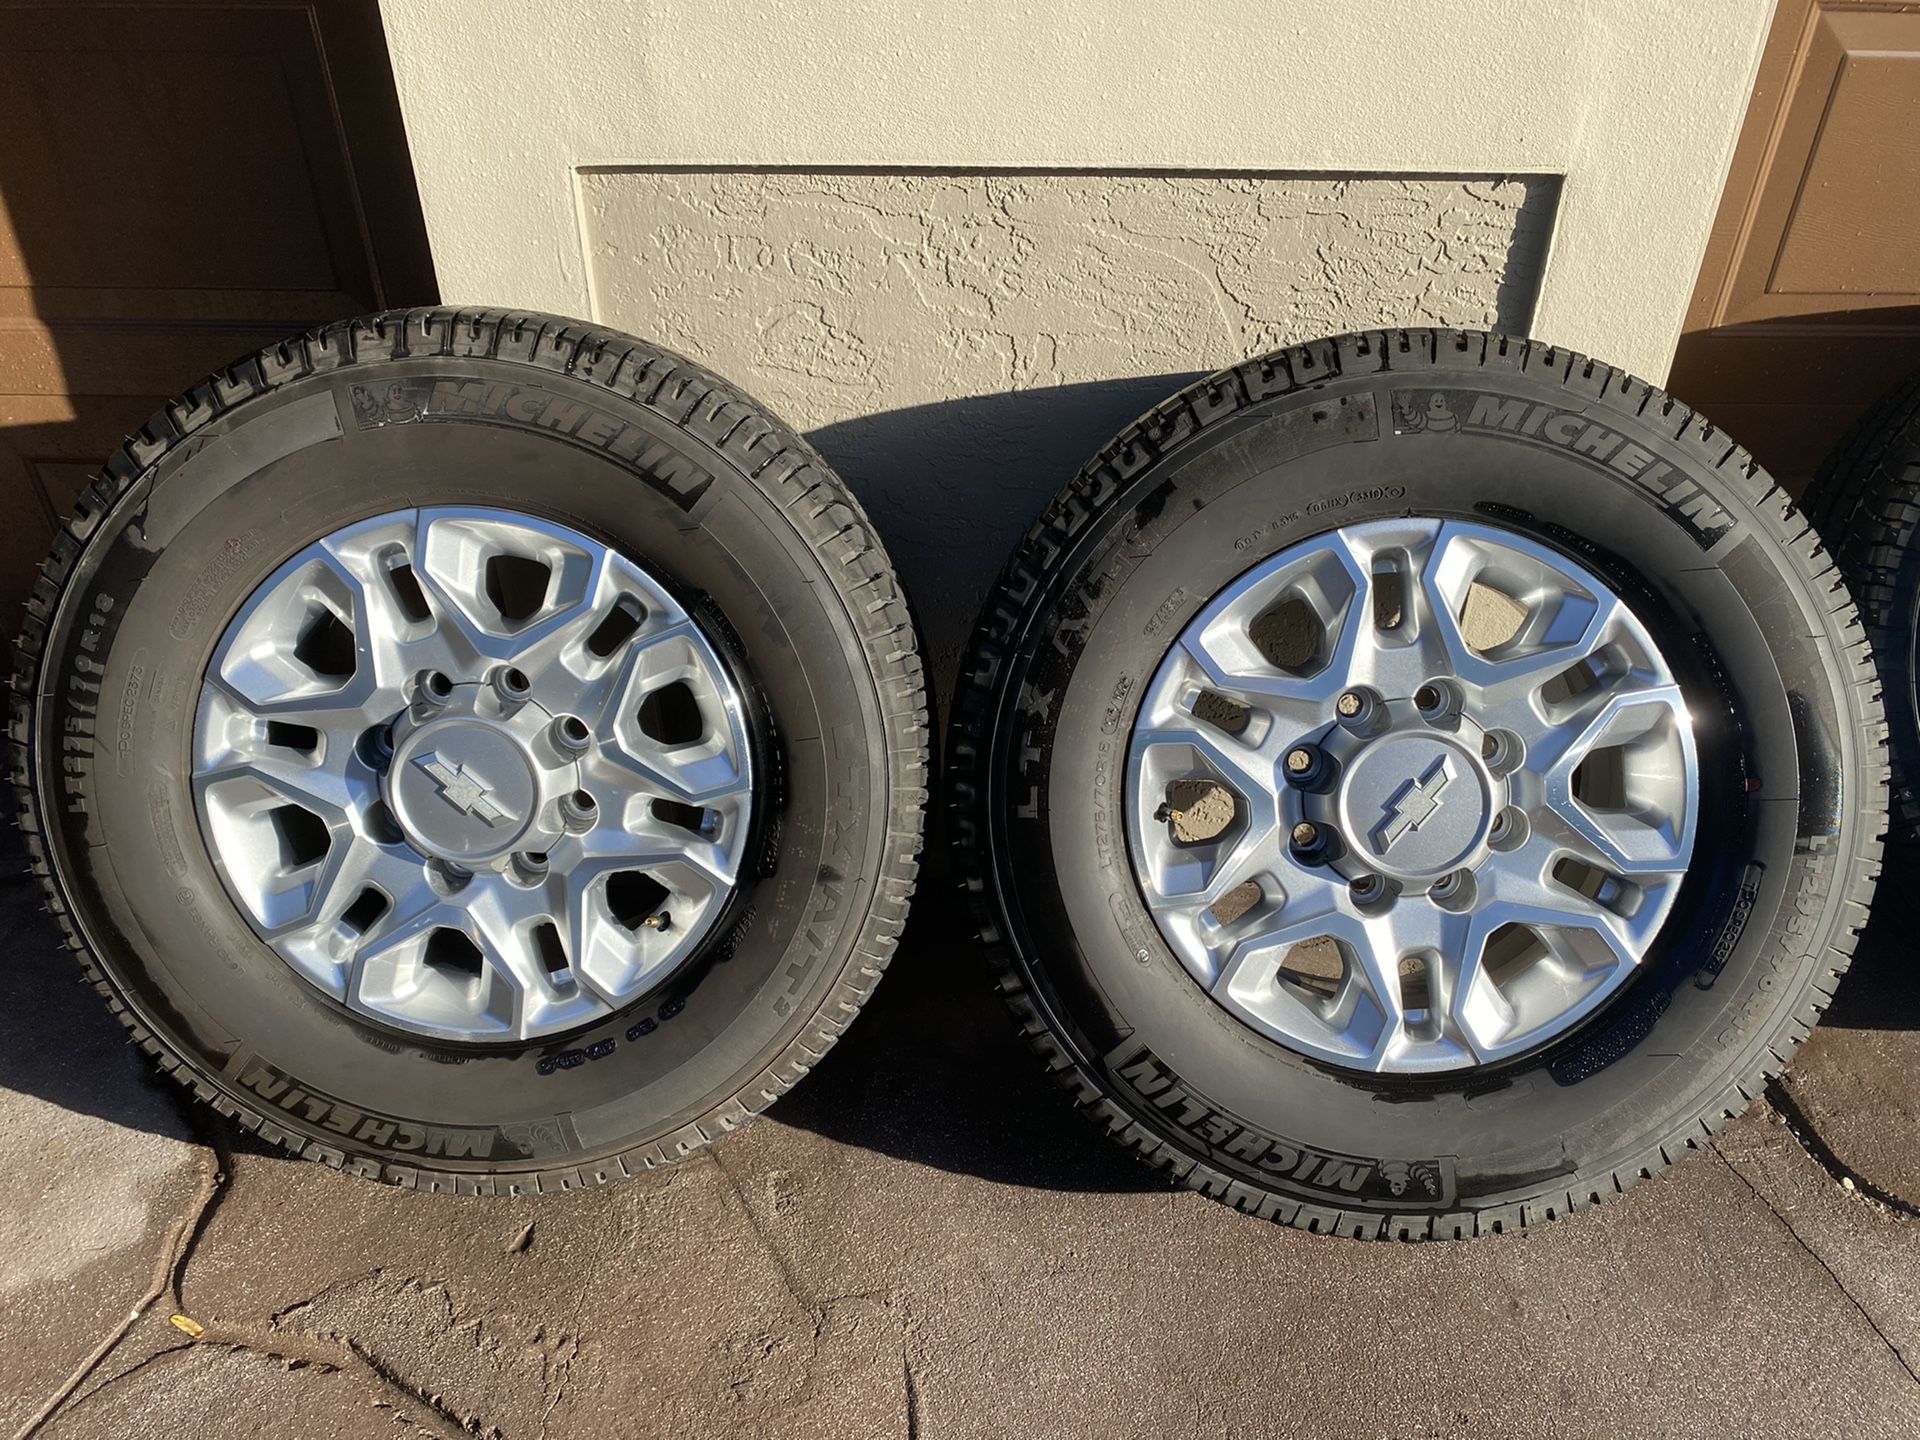 Chevy Silverado 2500hd Wheels And Tires For Sale In Parkland Fl Offerup